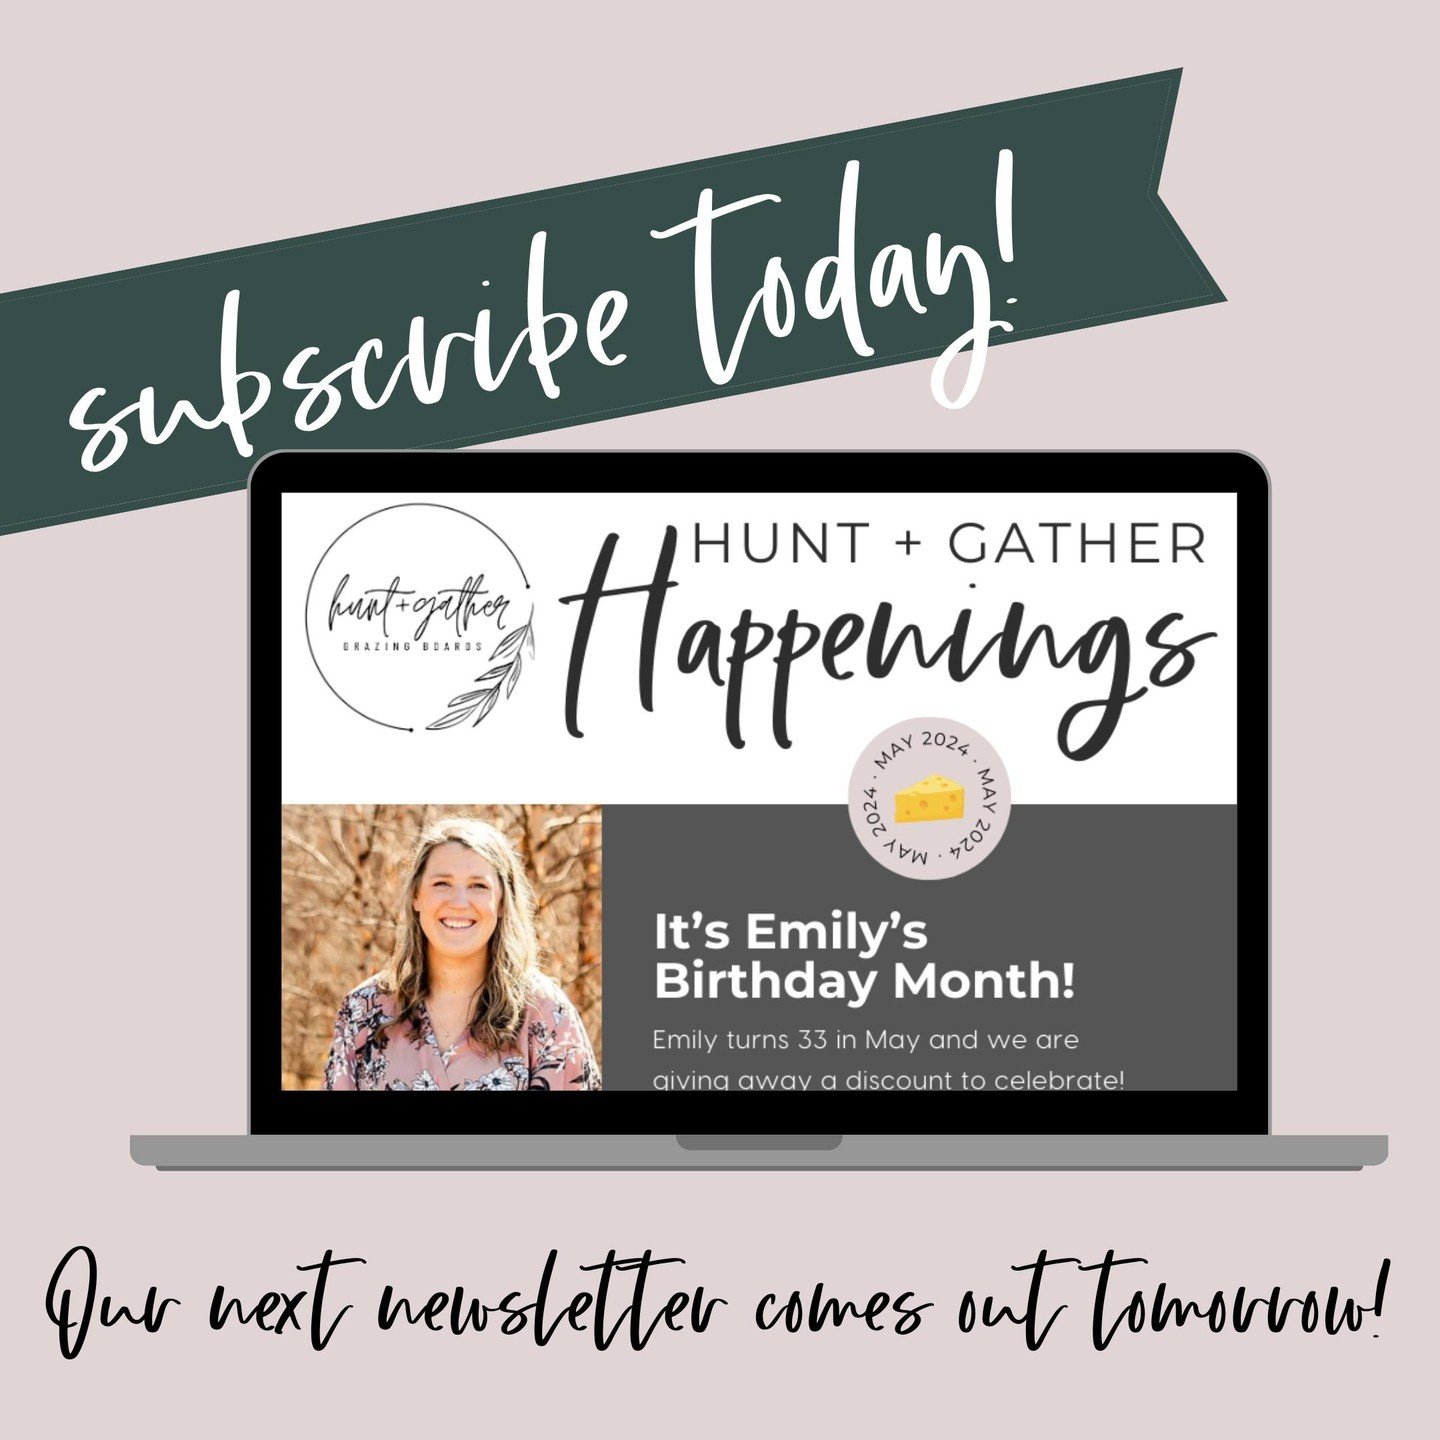 Subscribe today on our website for our newsletter - exciting news is coming soon! ✨ You can use our link in bio!

huntandgathergrazing.com #HuntAndGatherGrazing